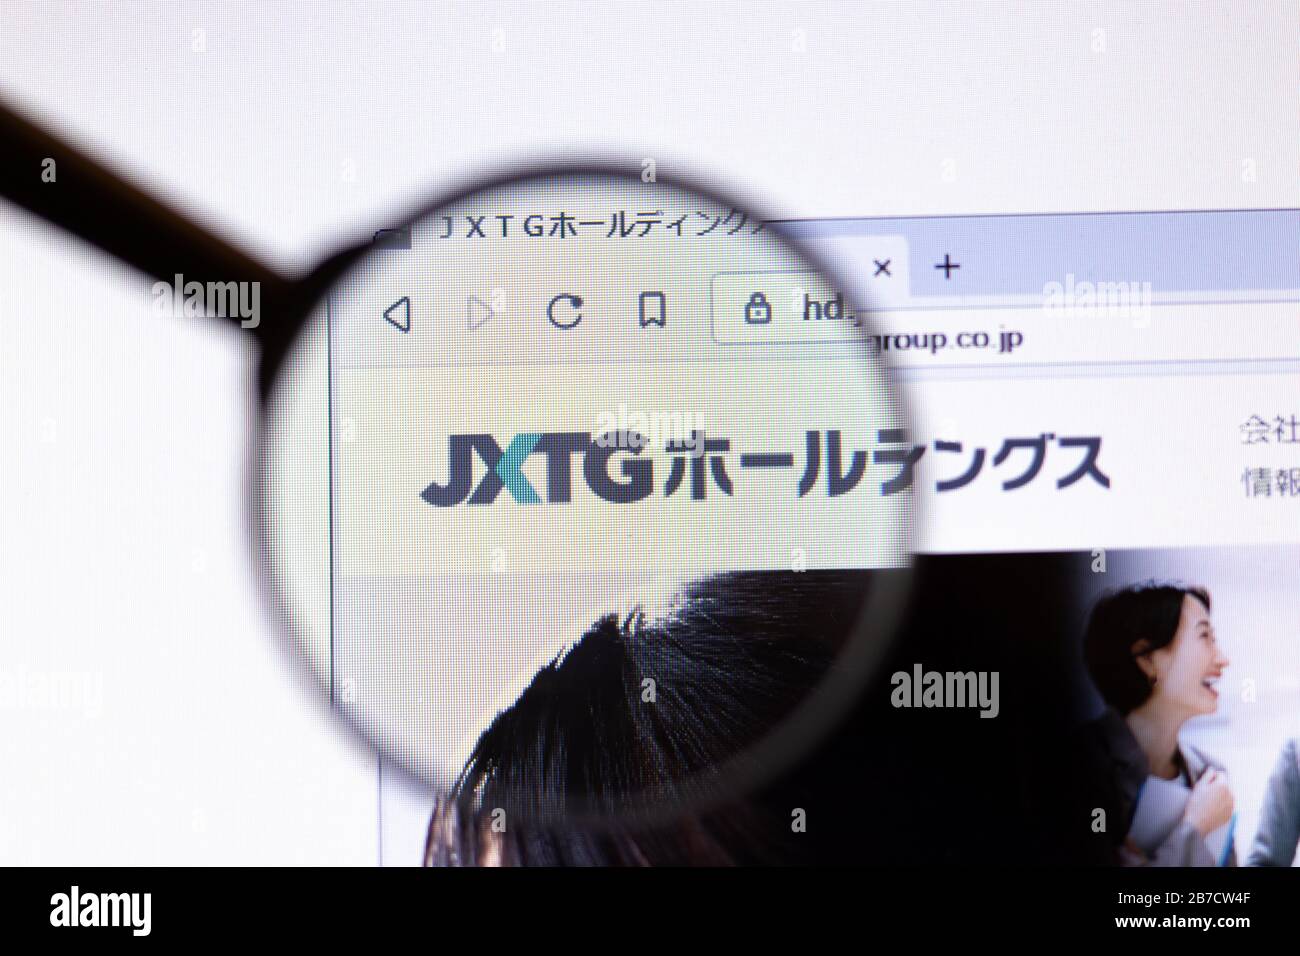 Los Angeles, California, USA - 15 March 2020: JXTG Holdings icon on website page. Hd.jxtg-group.co.jp logo visible on display screen, Illustrative Stock Photo